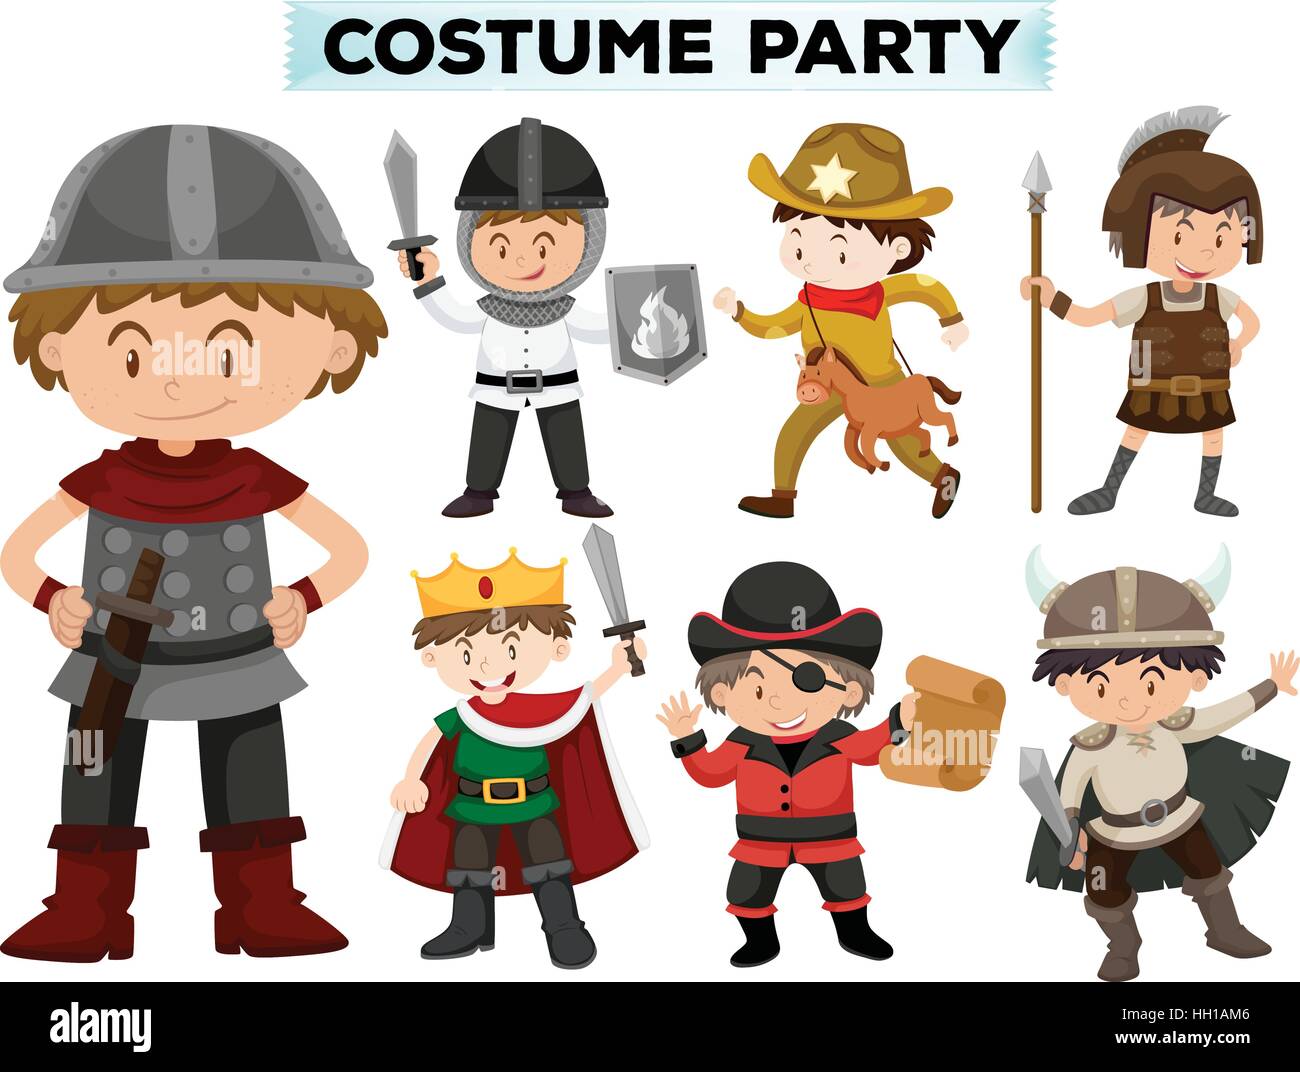 Costume party with boys in different costumes illustration Stock Vector